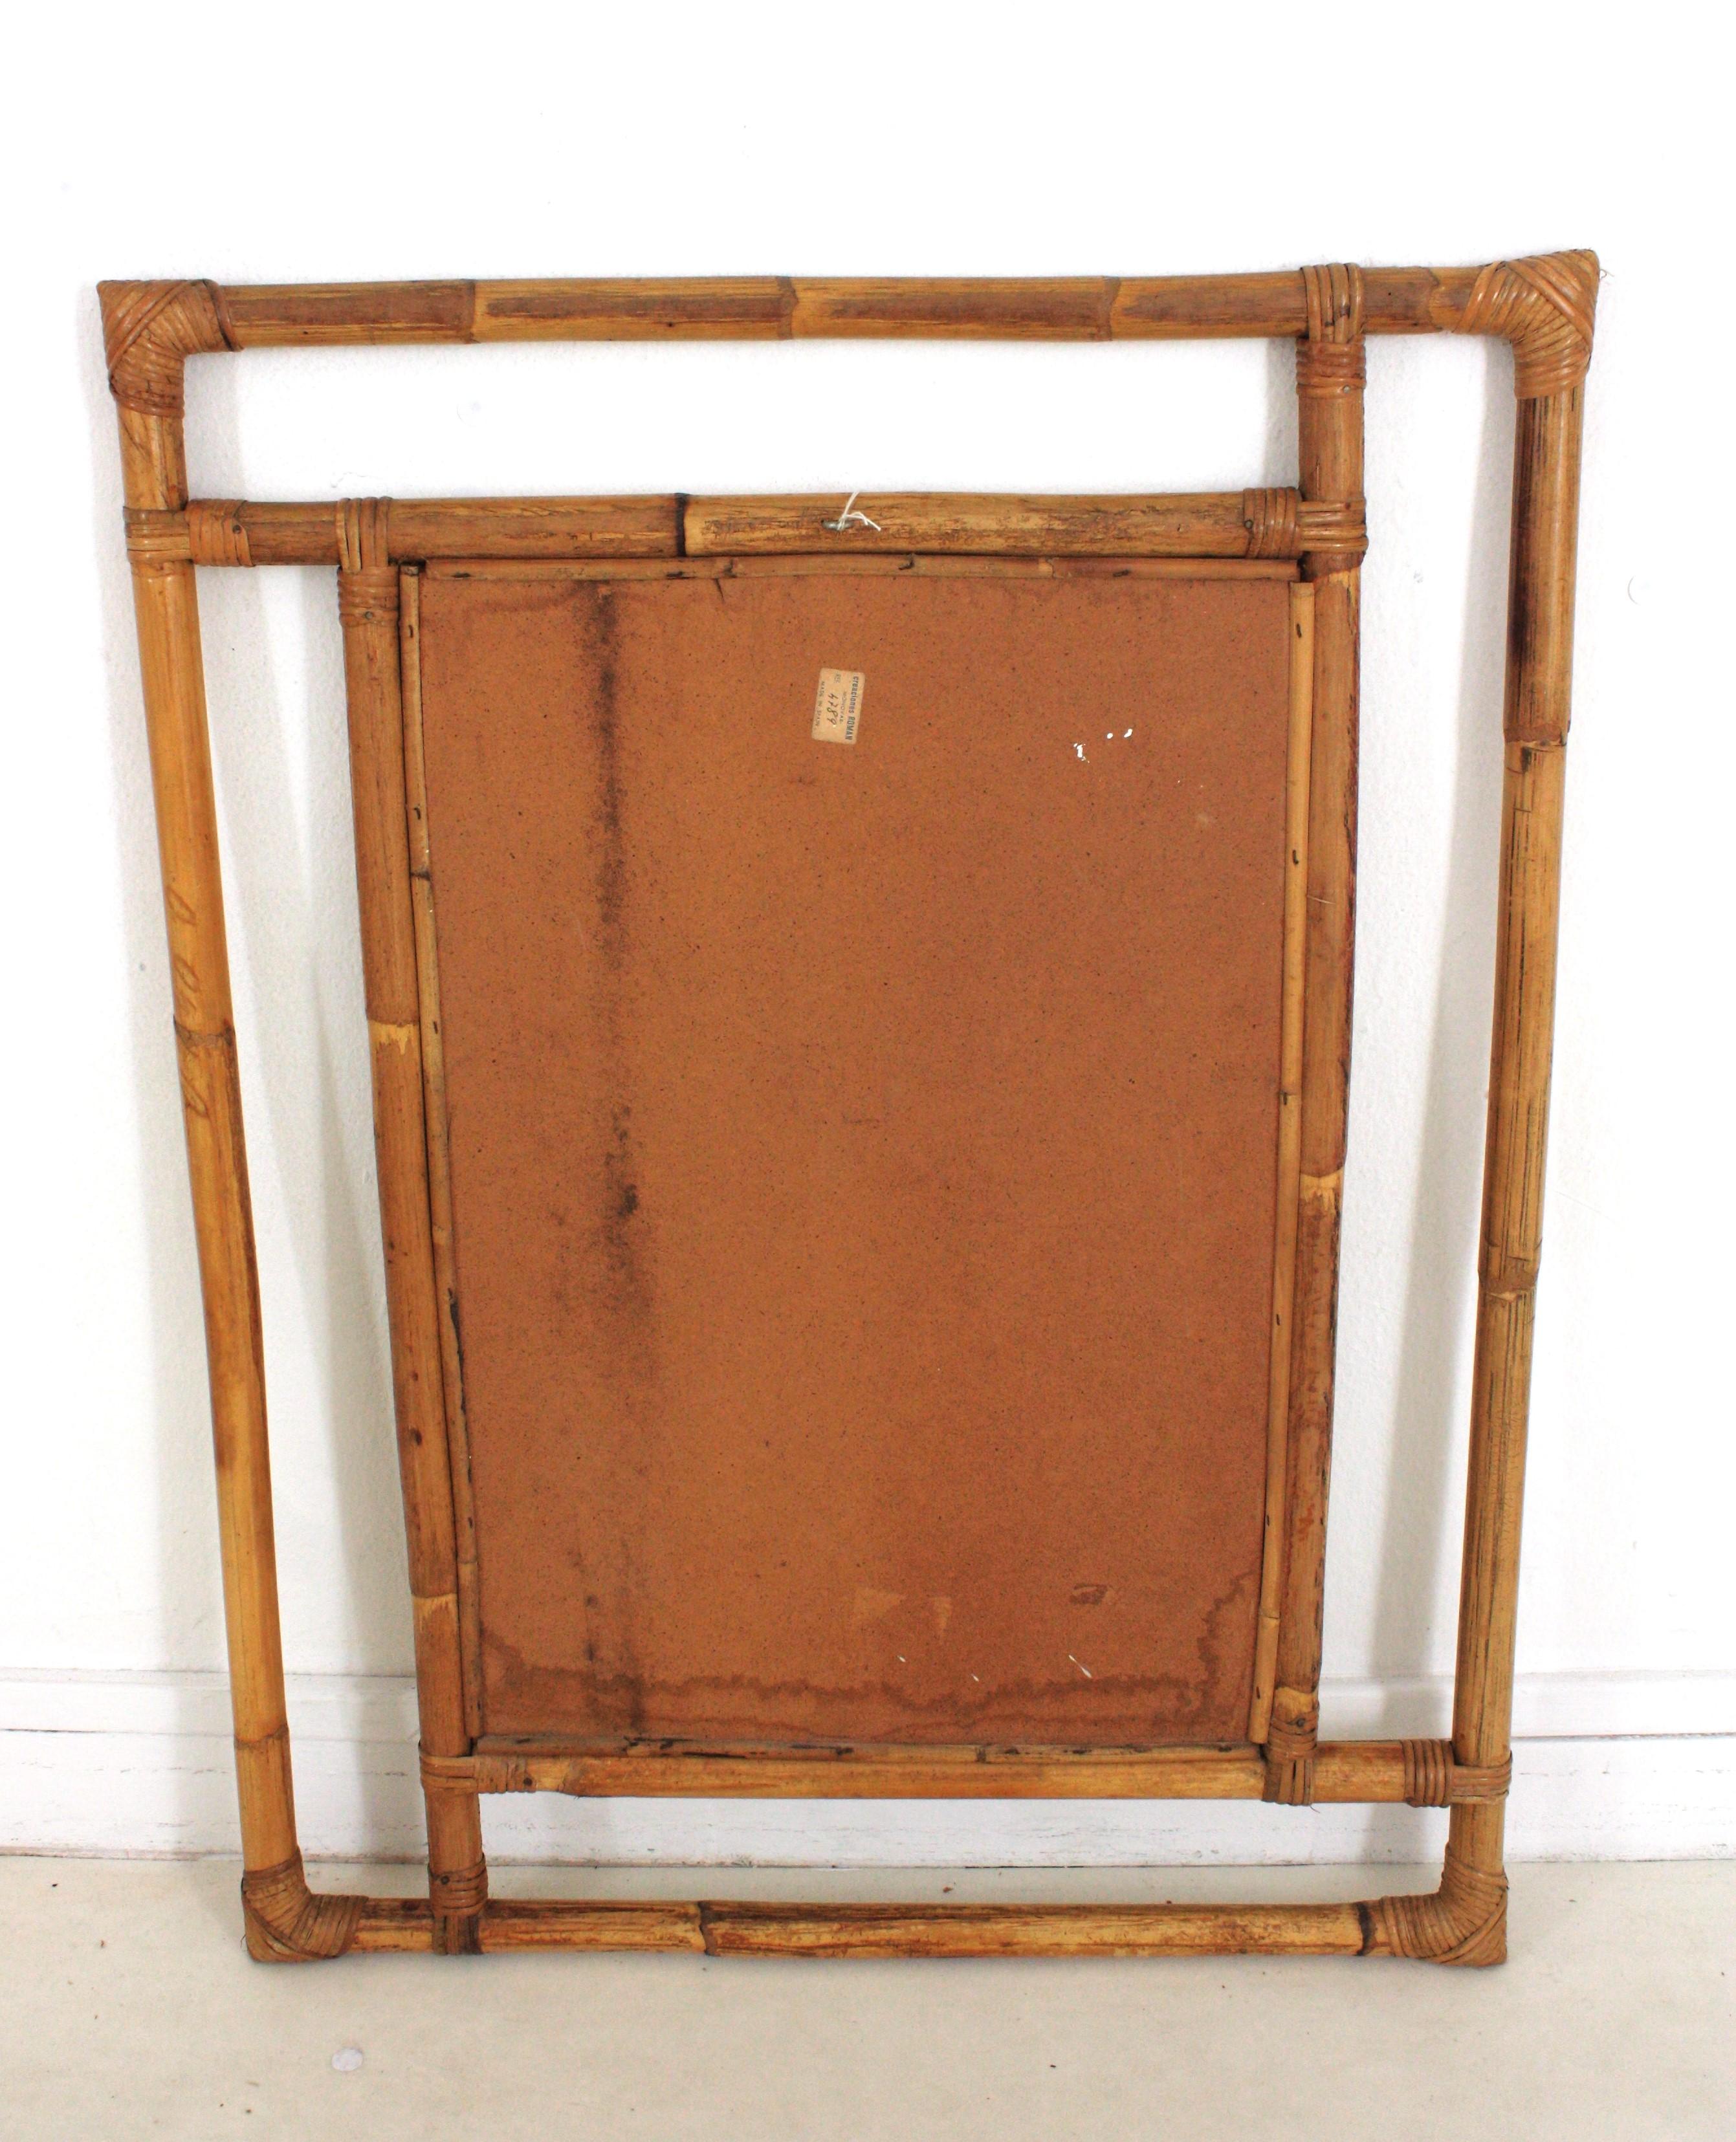 Spanish Large Rattan Rectangular Mirror with Geometric Frame, 1960s For Sale 4